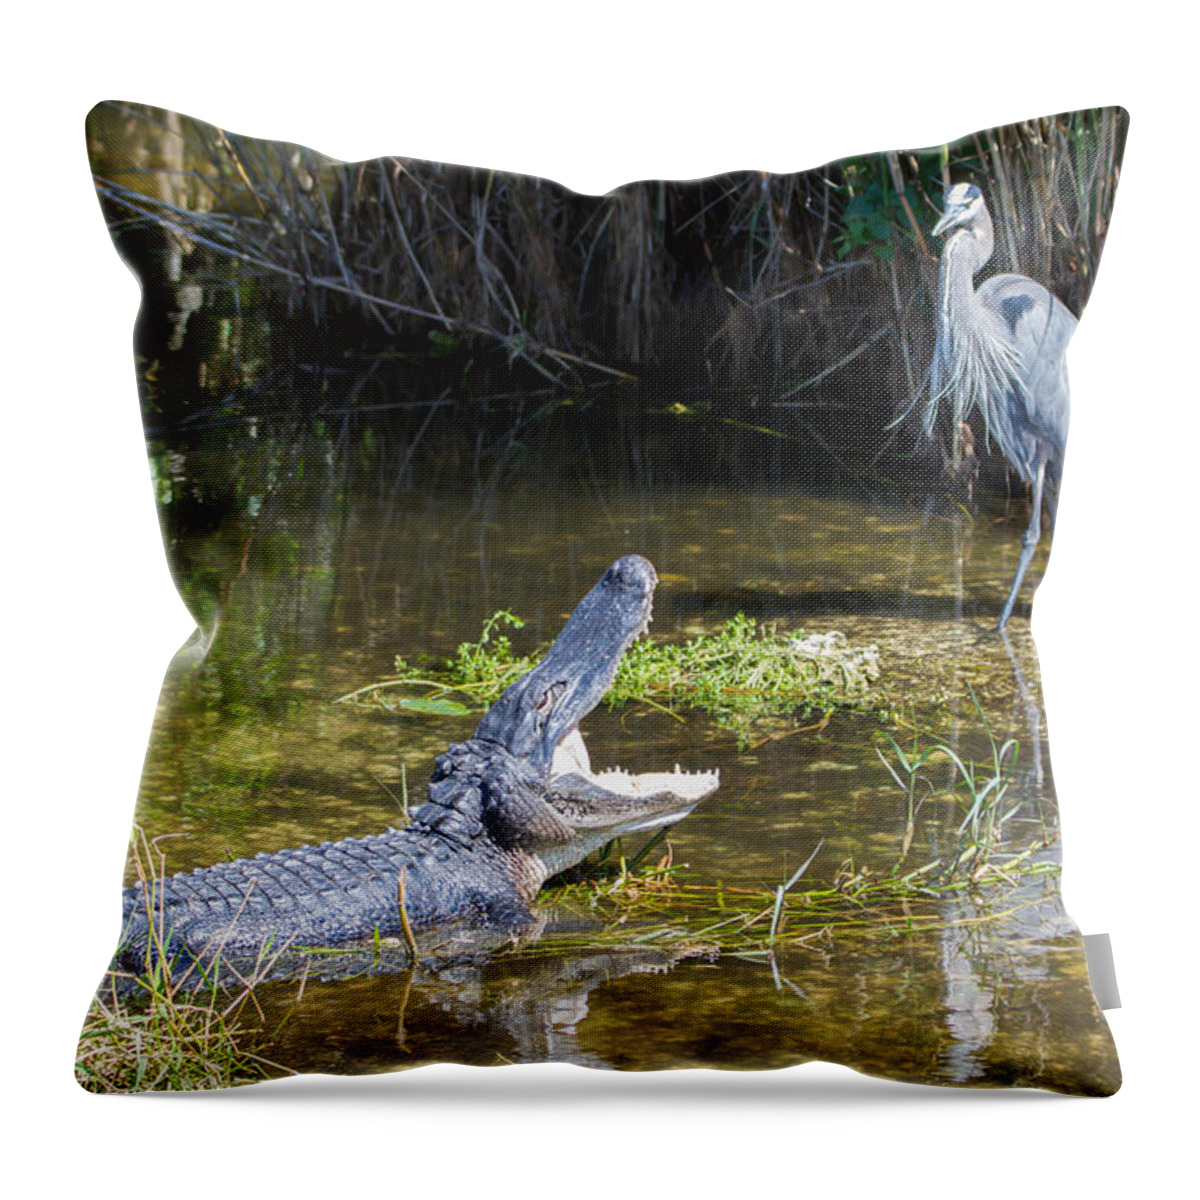 Everglades National Park Throw Pillow featuring the photograph Everglades 431 by Michael Fryd